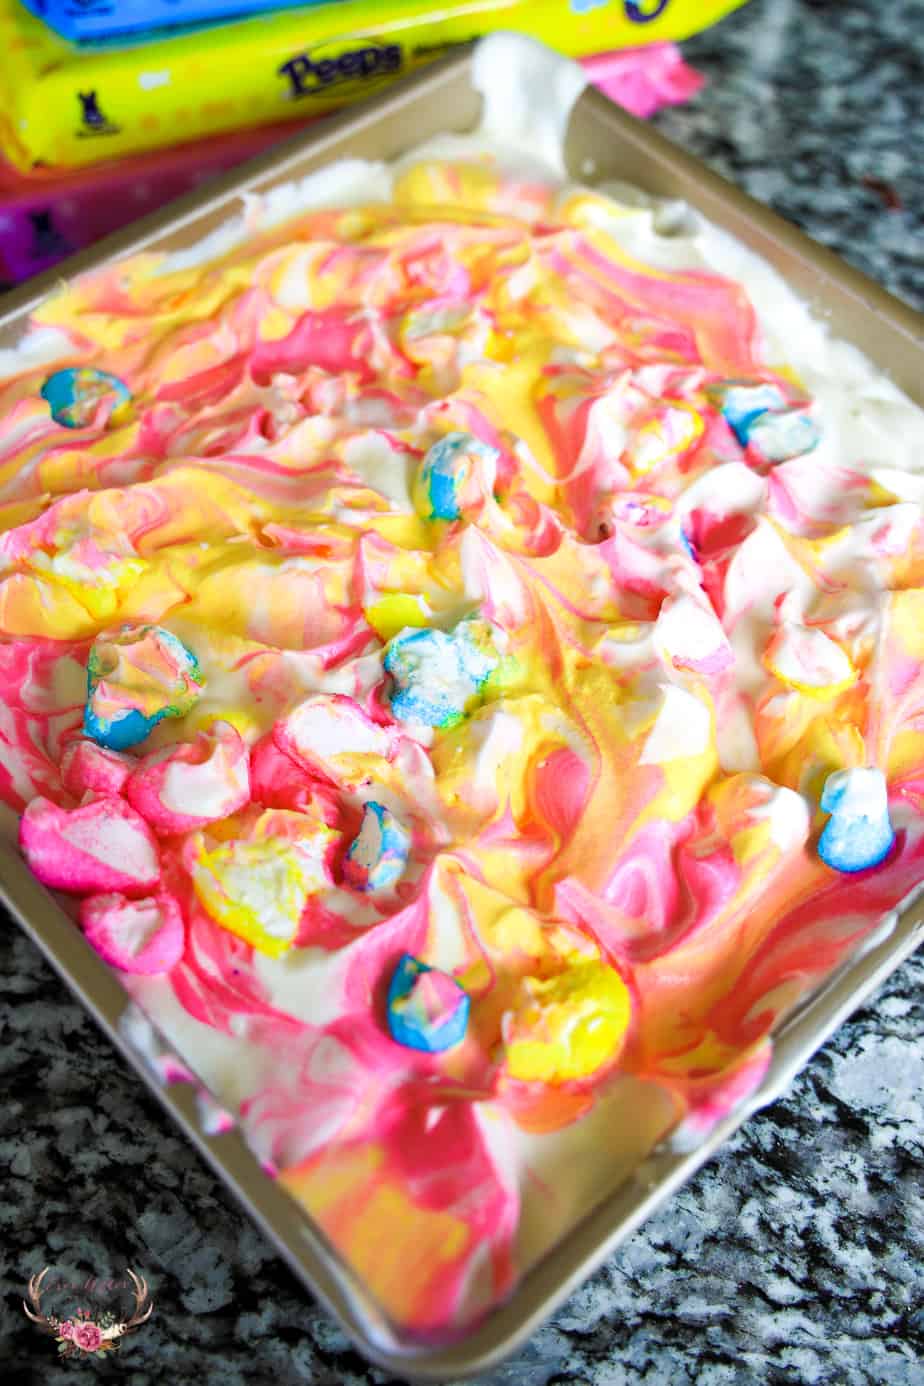 How to Make Peeps Marshmallow Ice Cream at Home